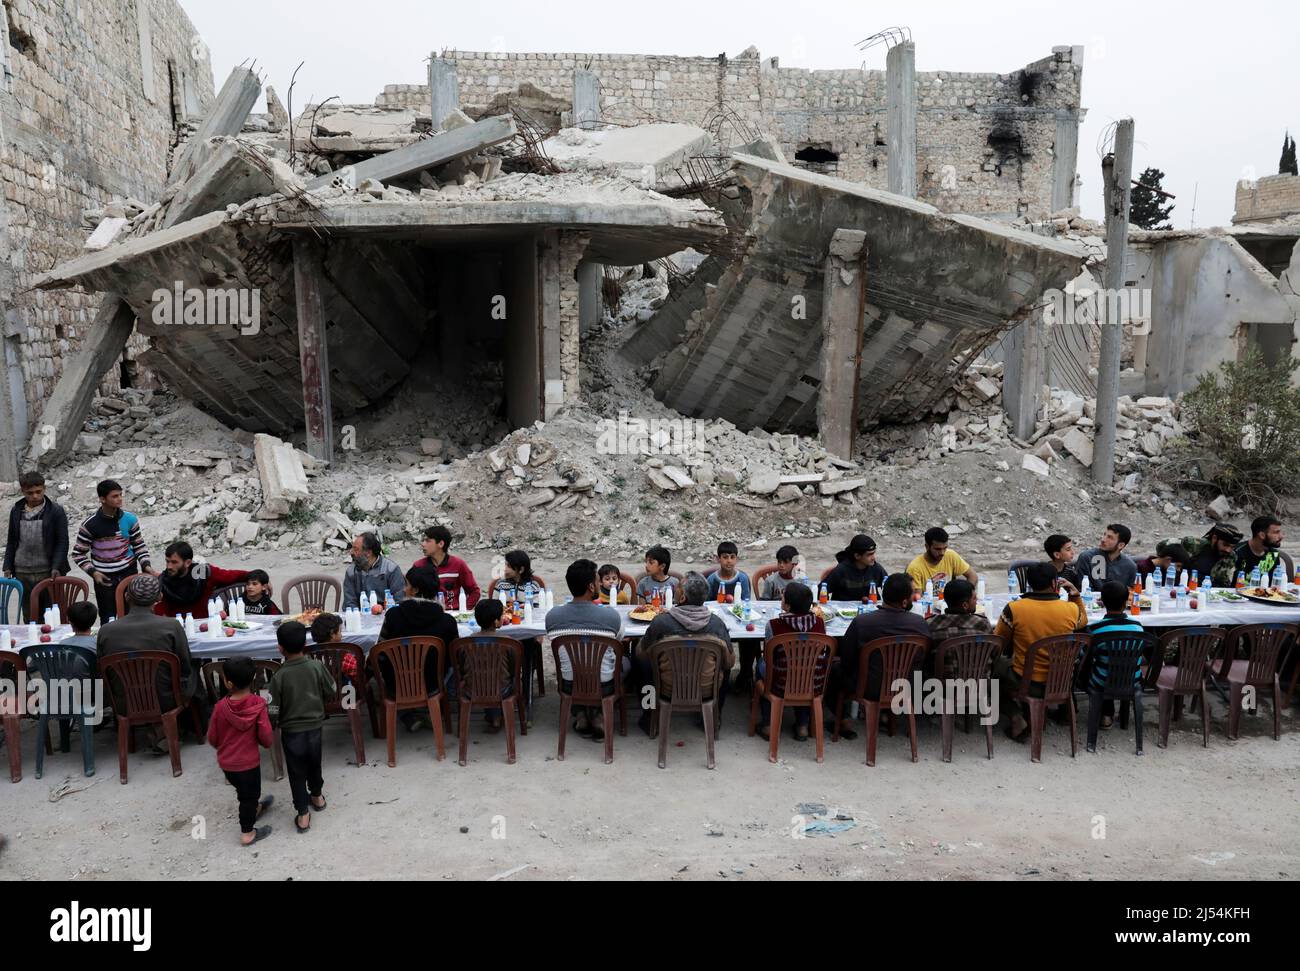 People gather amidst damaged buildings during Iftar (breaking fast), during the holy month of Ramadan, in the town of Tadef, on a frontline between Russian-backed Syrian government forces and Turkish-backed Syrian rebel-held territory, in northern Syria April 18, 2022. Picture taken April 18, 2022.  REUTERS/Khalil Ashawi Stock Photo